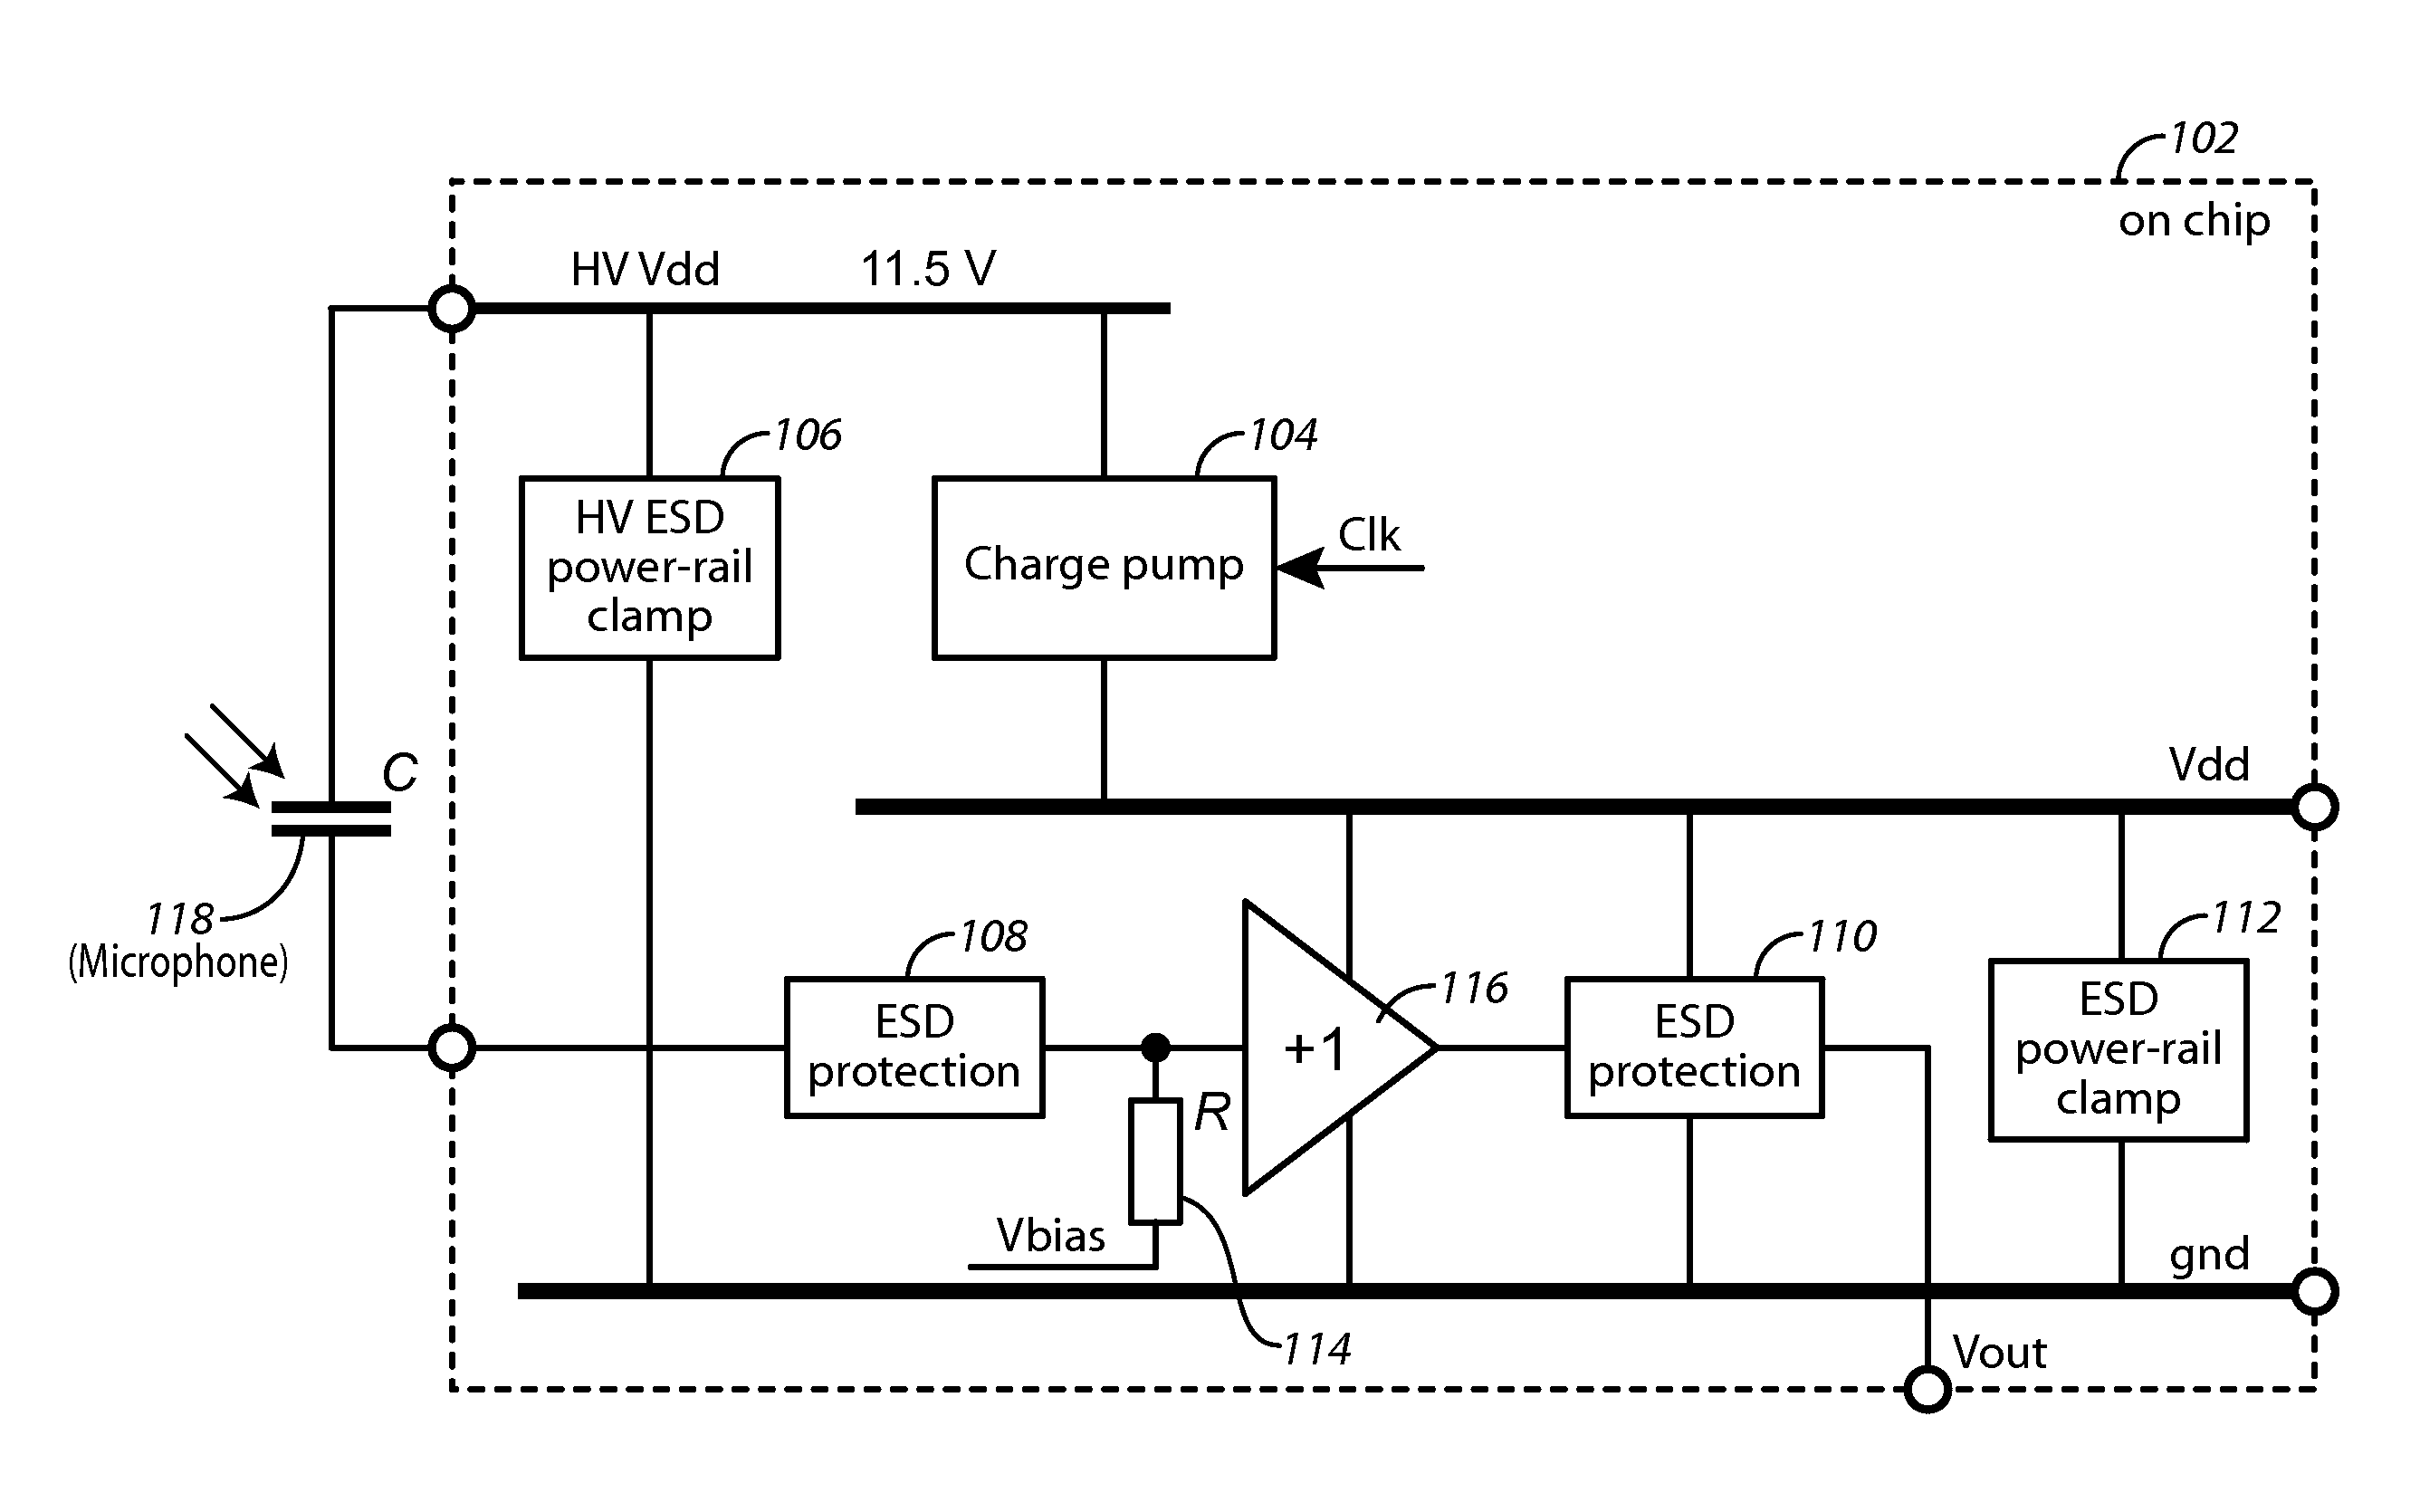 Apparatus and Method For High Voltage I/O Electro-Static Discharge Protection